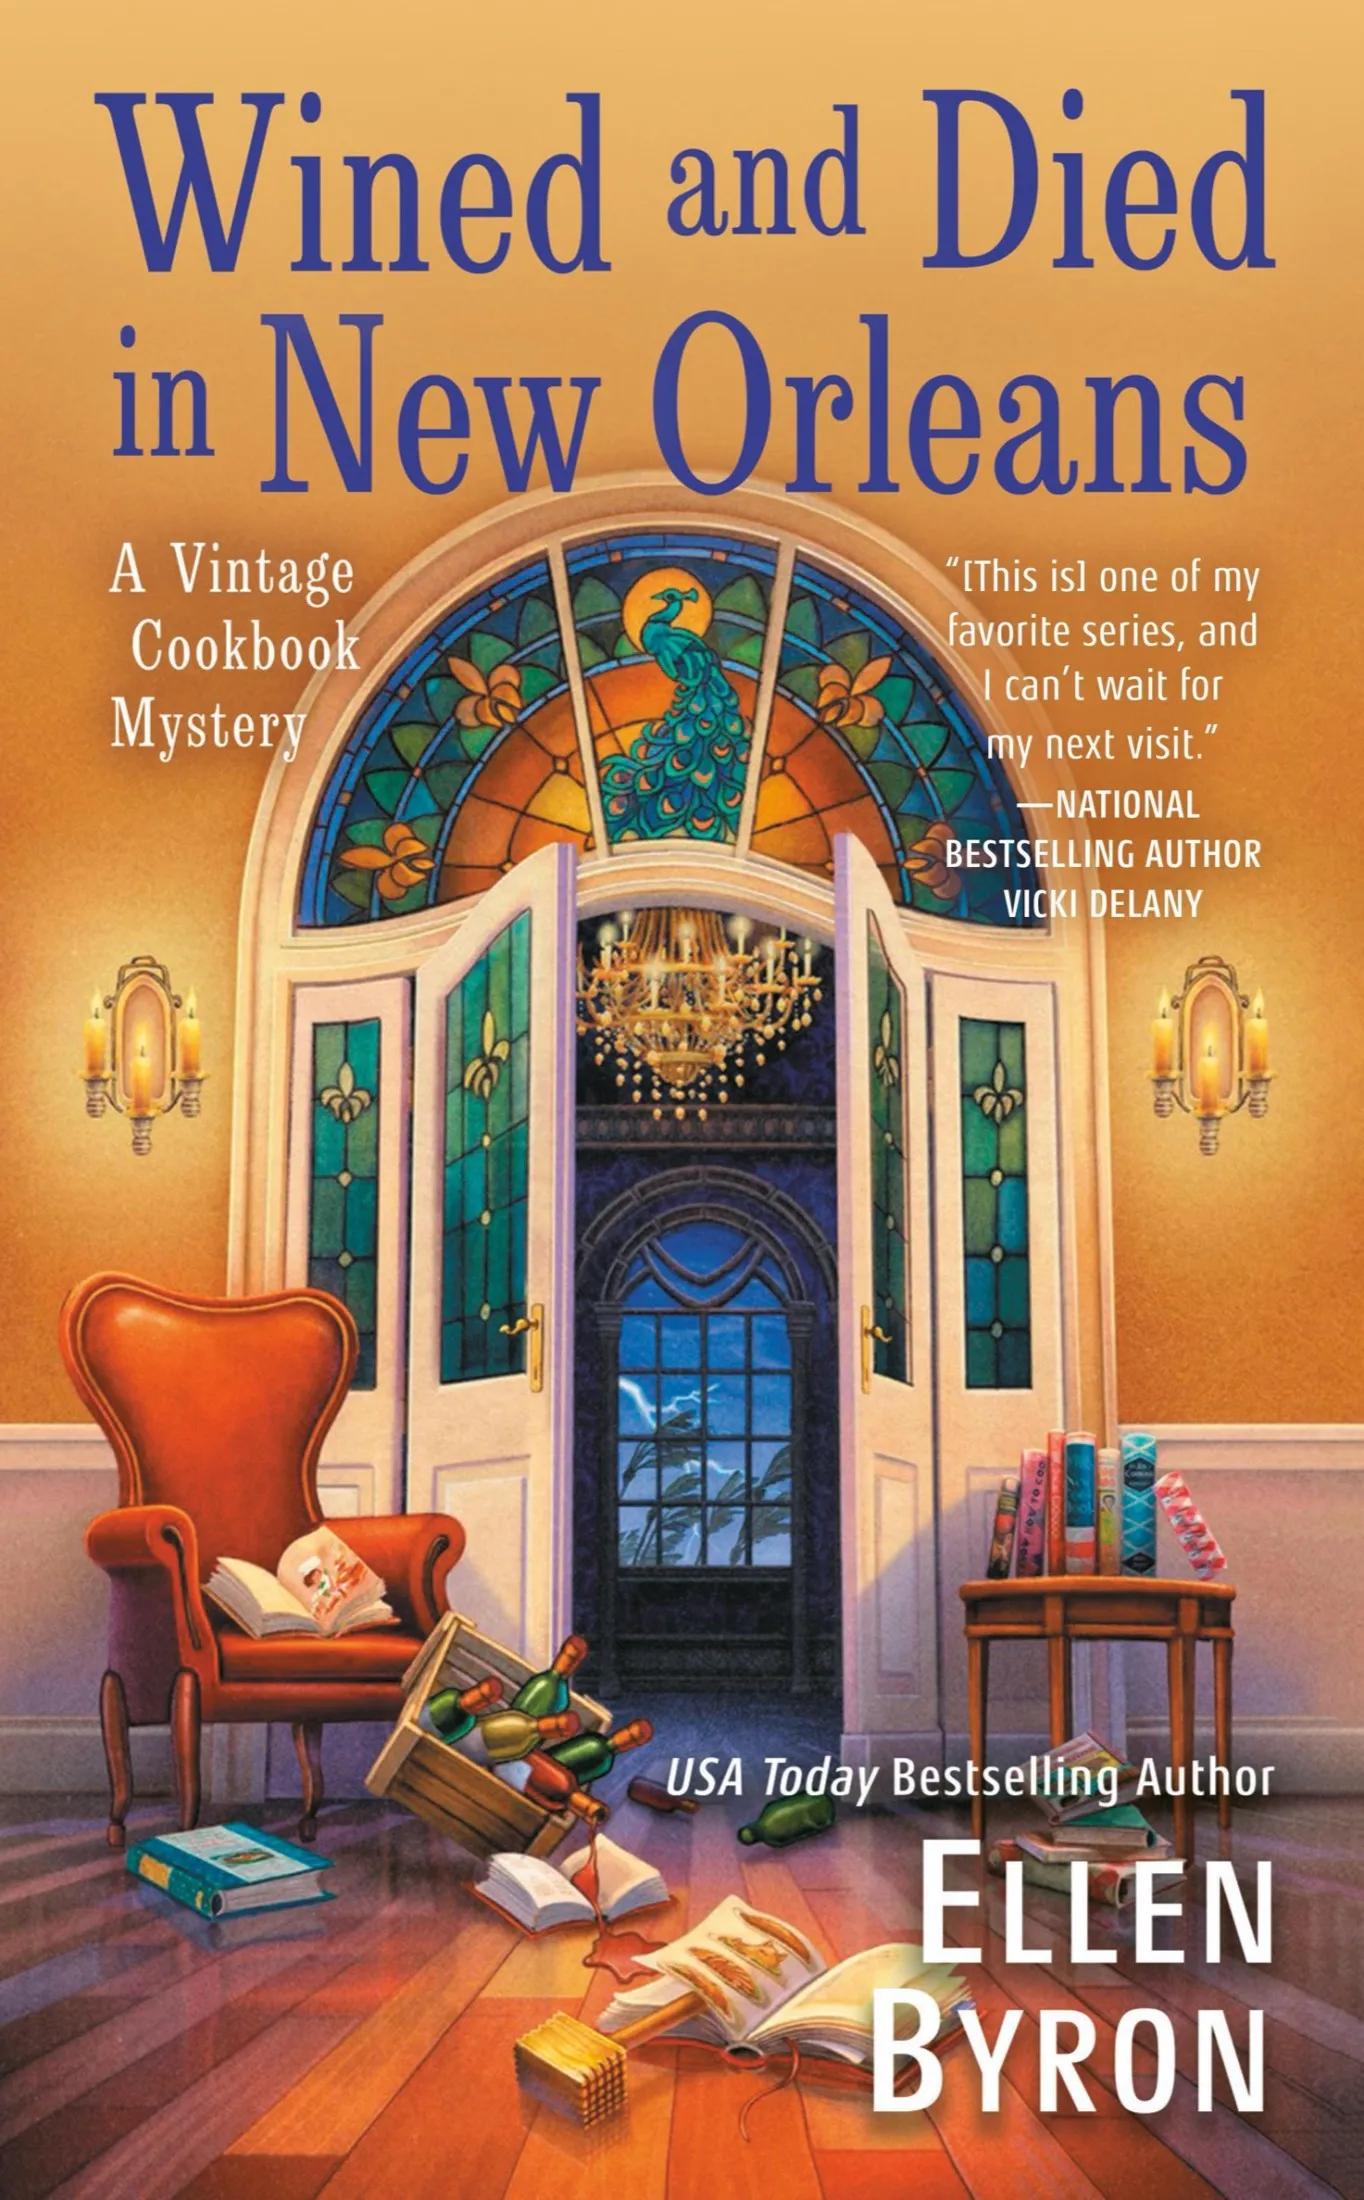 Wined and Died in New Orleans (A Vintage Cookbook Mystery #2)